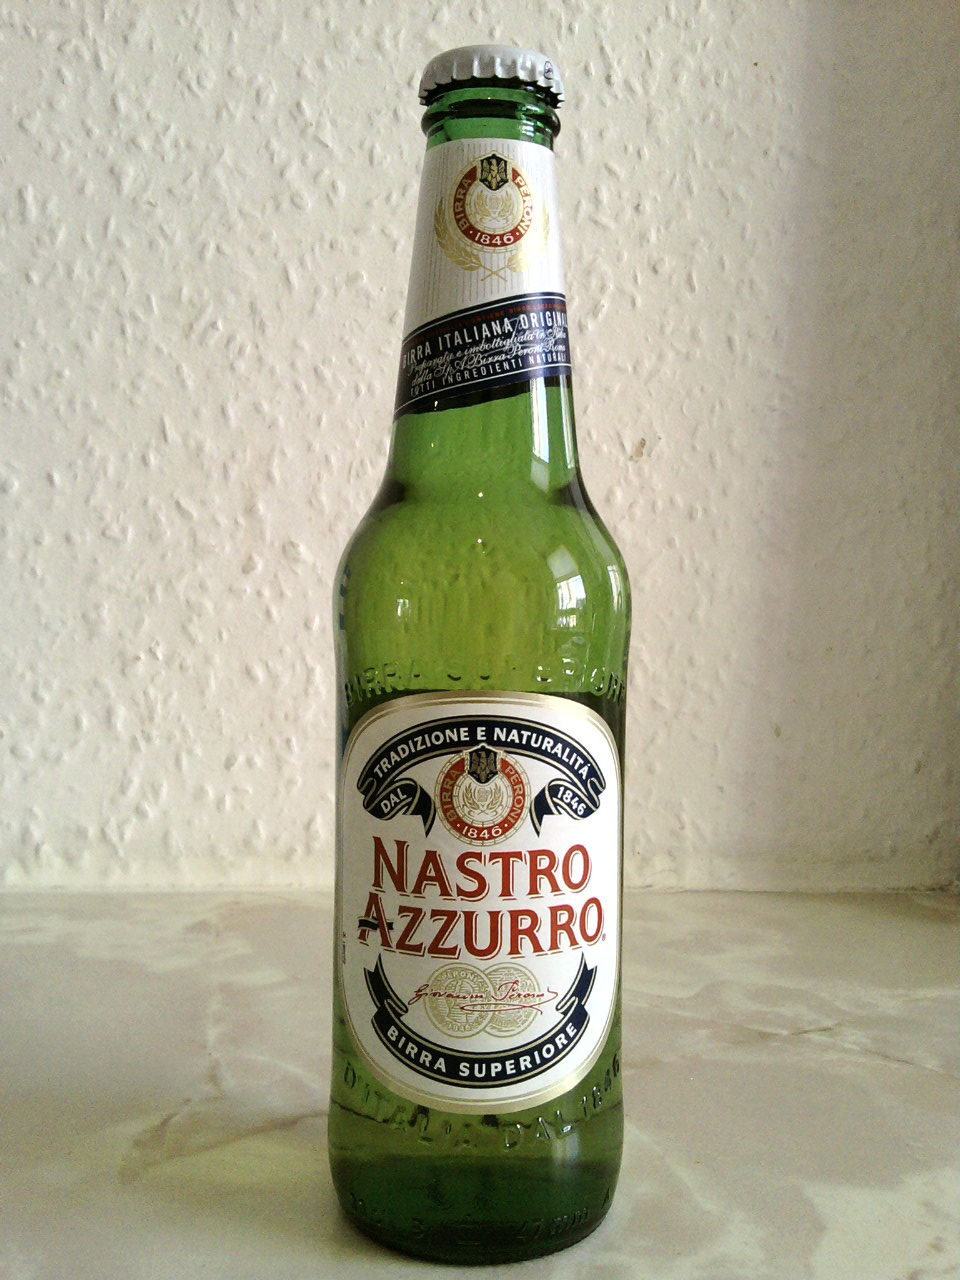 What Does Nastro Azzurro Mean In English